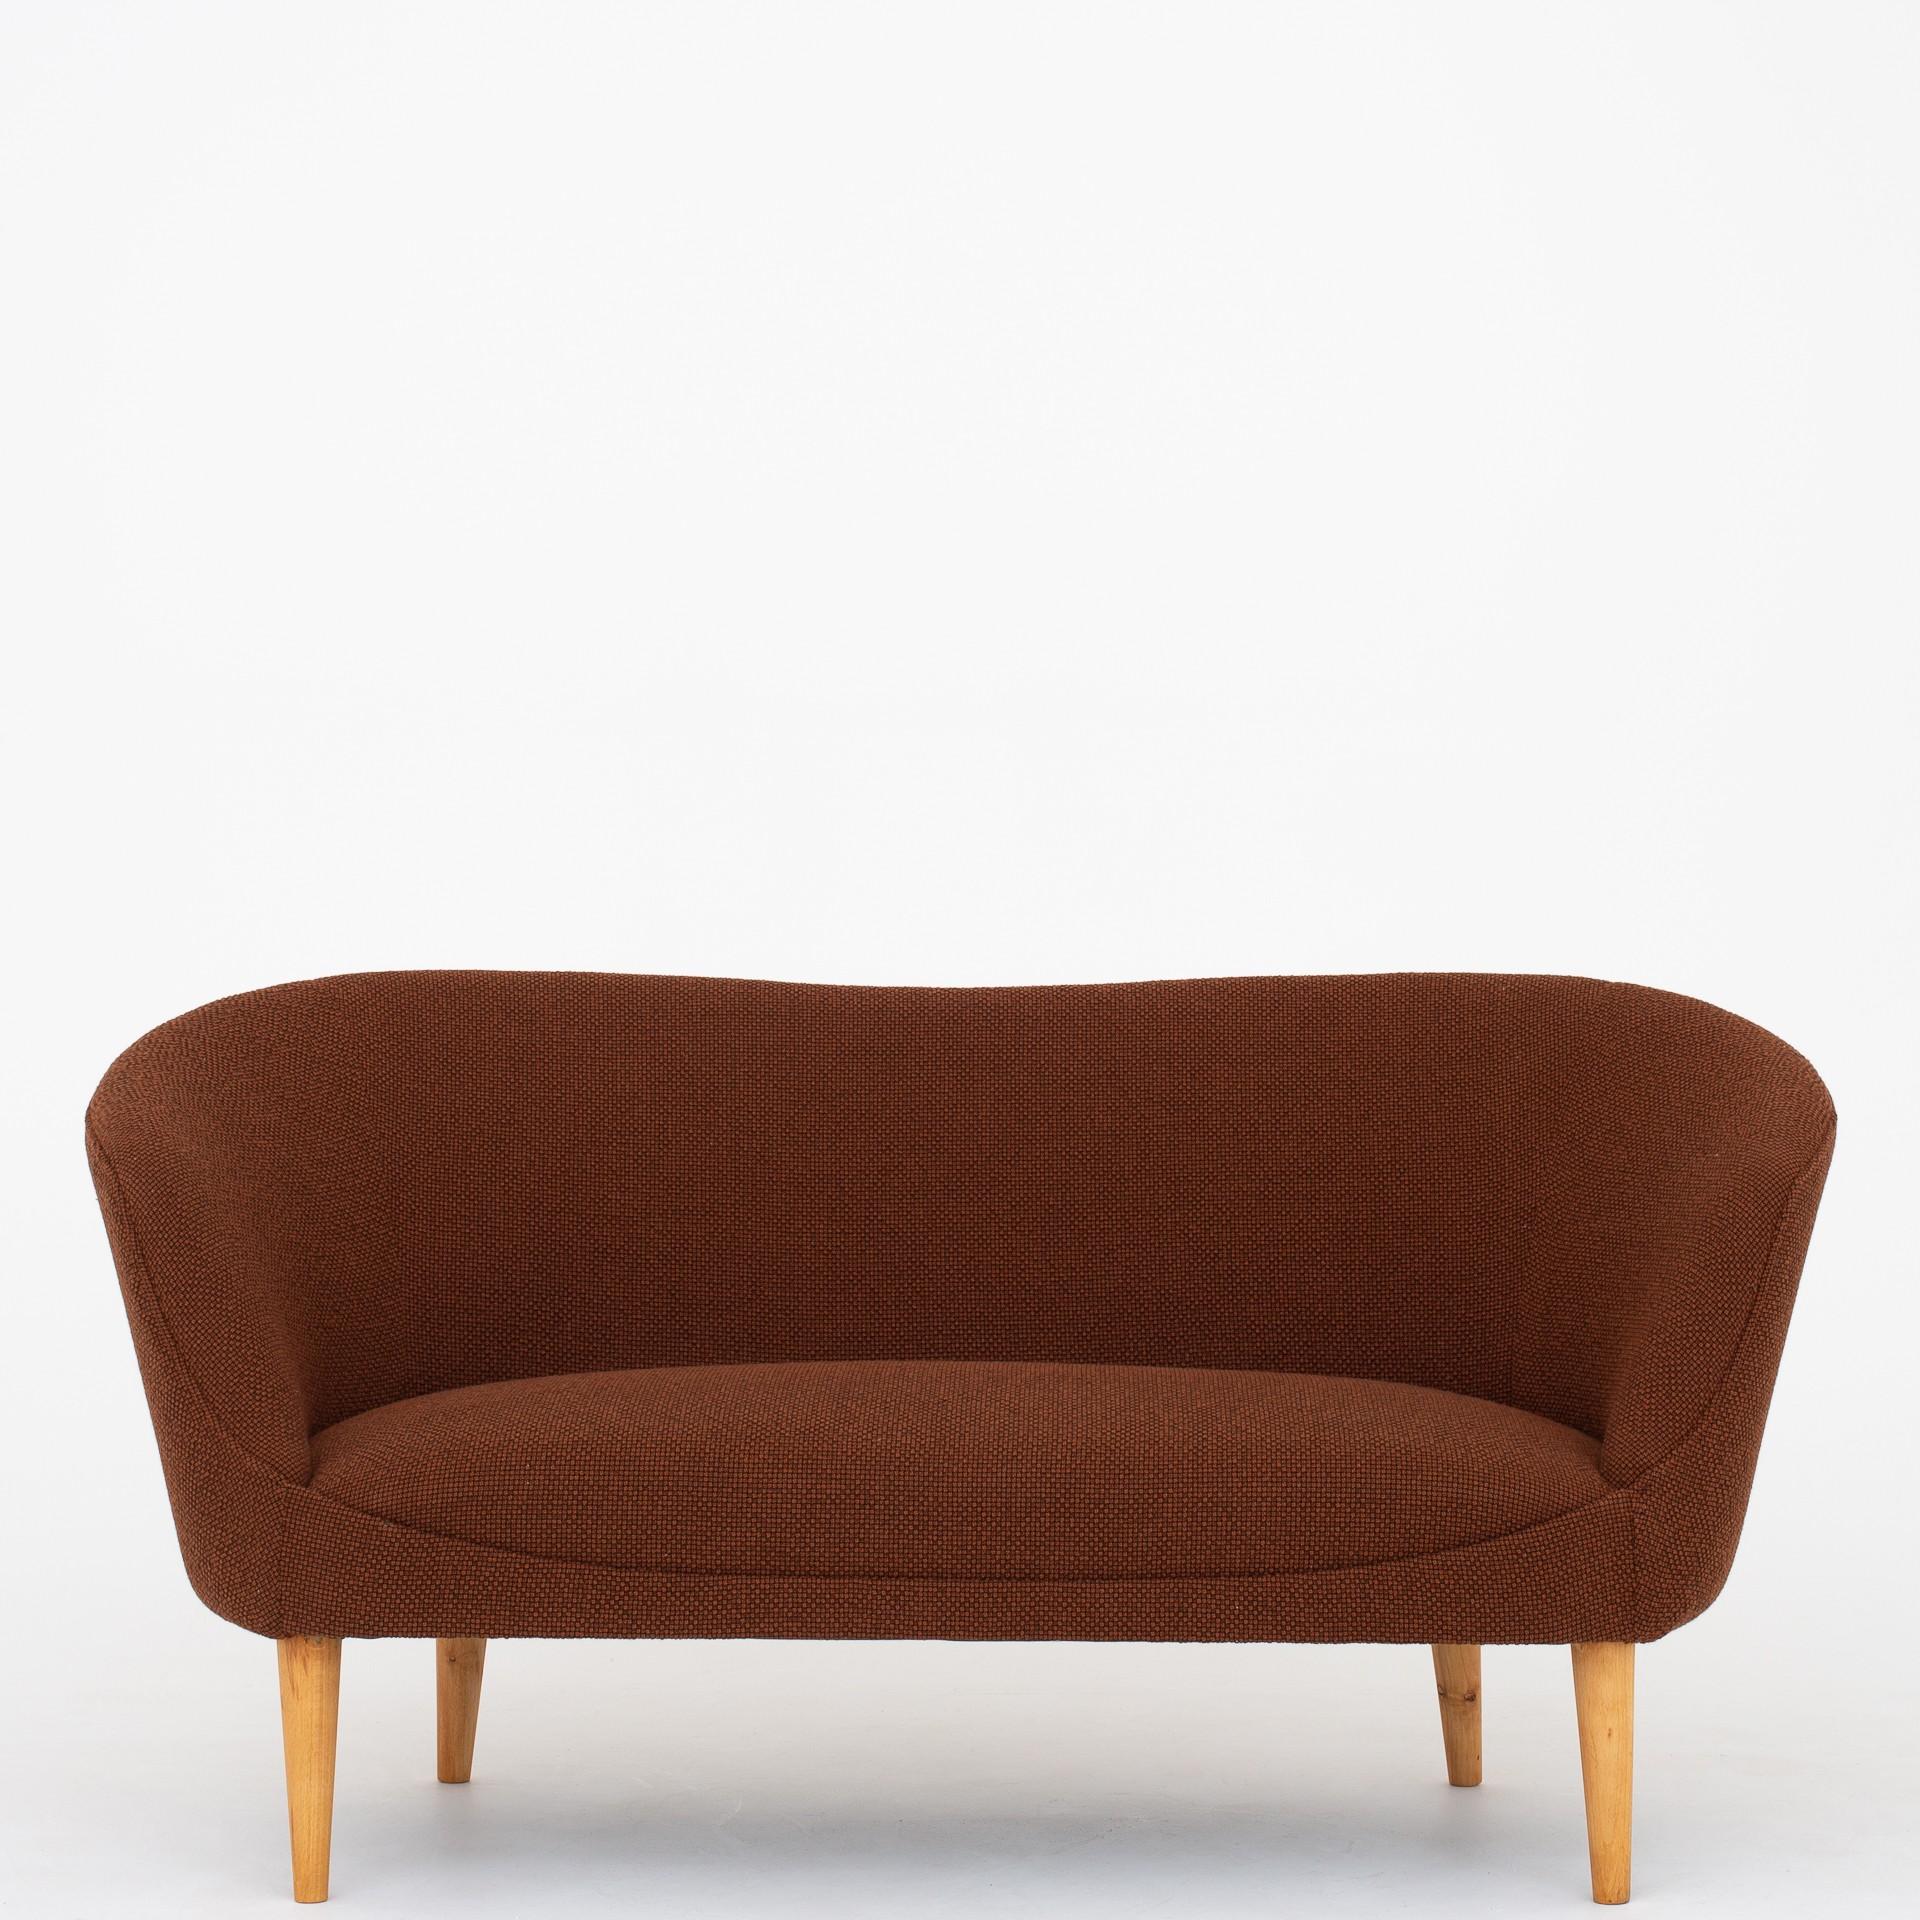 20th Century 2-Seat Sofa by Unknown Architect For Sale